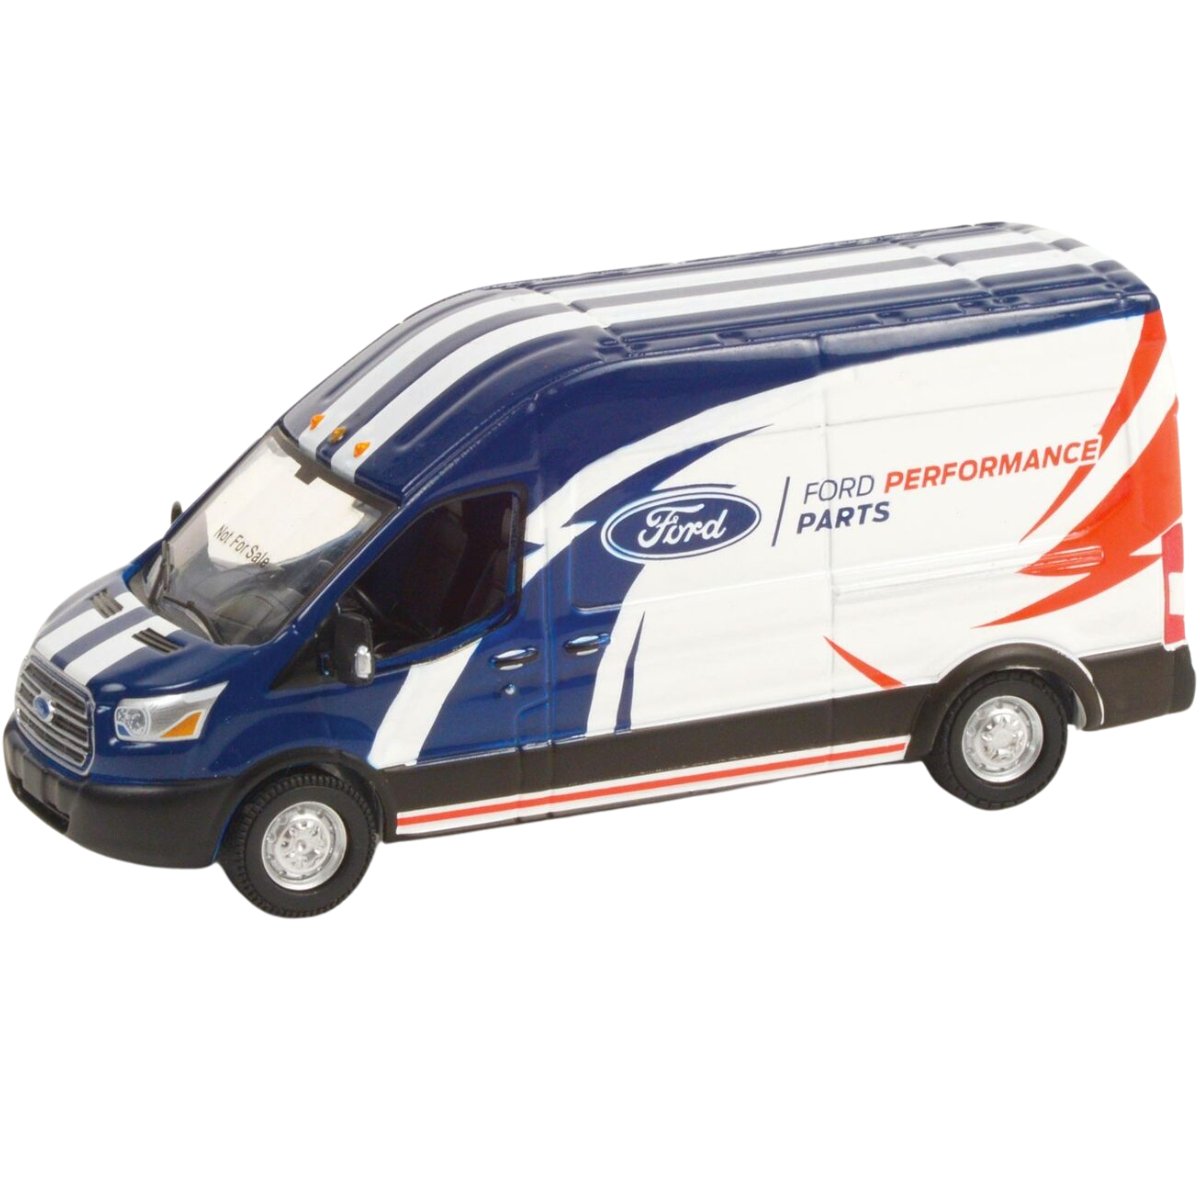 Greenlight 2019 Ford Transit LWB High Roof, Ford Performance Parts - 1:64 Scale - Phillips Hobbies